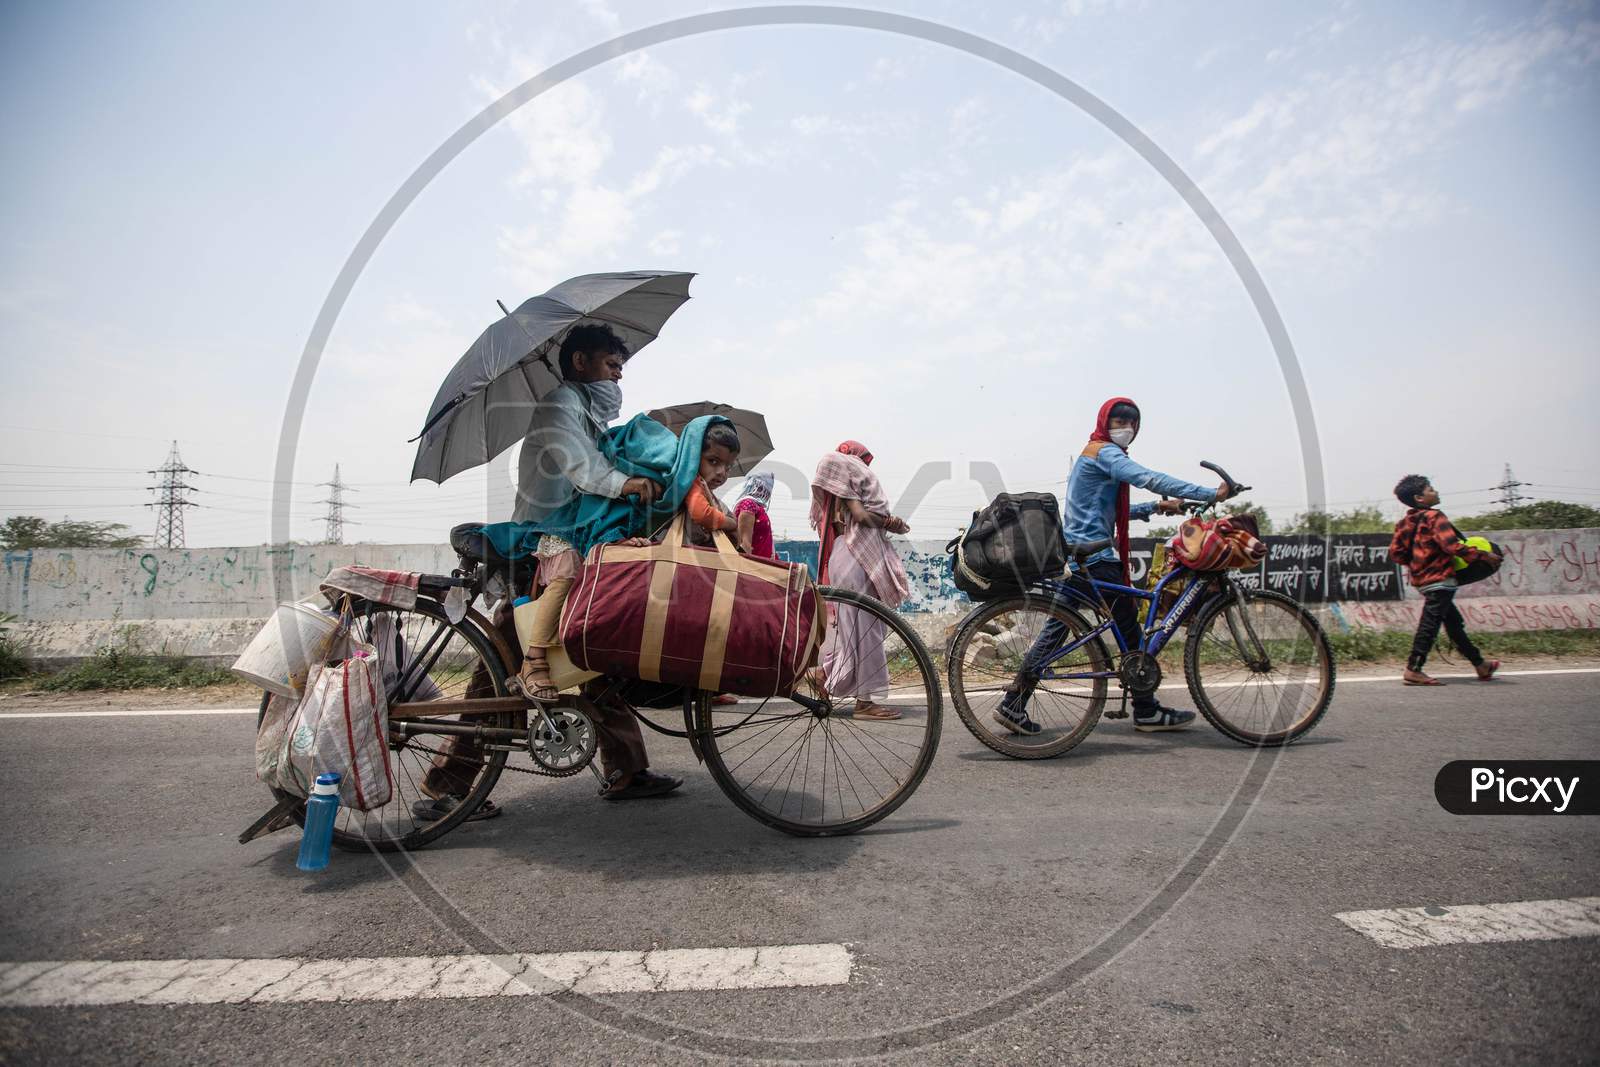 Migrant Worker Kamlesh  Peddling Back To His Village In Sagar District Of Madhya Pradesh With His Children Anushka 7, And Krishna, 4, In New Delhi, India, On May 11, 2020.Distance Between New Delhi To Sagar Is Approximately 680 Kilometres.